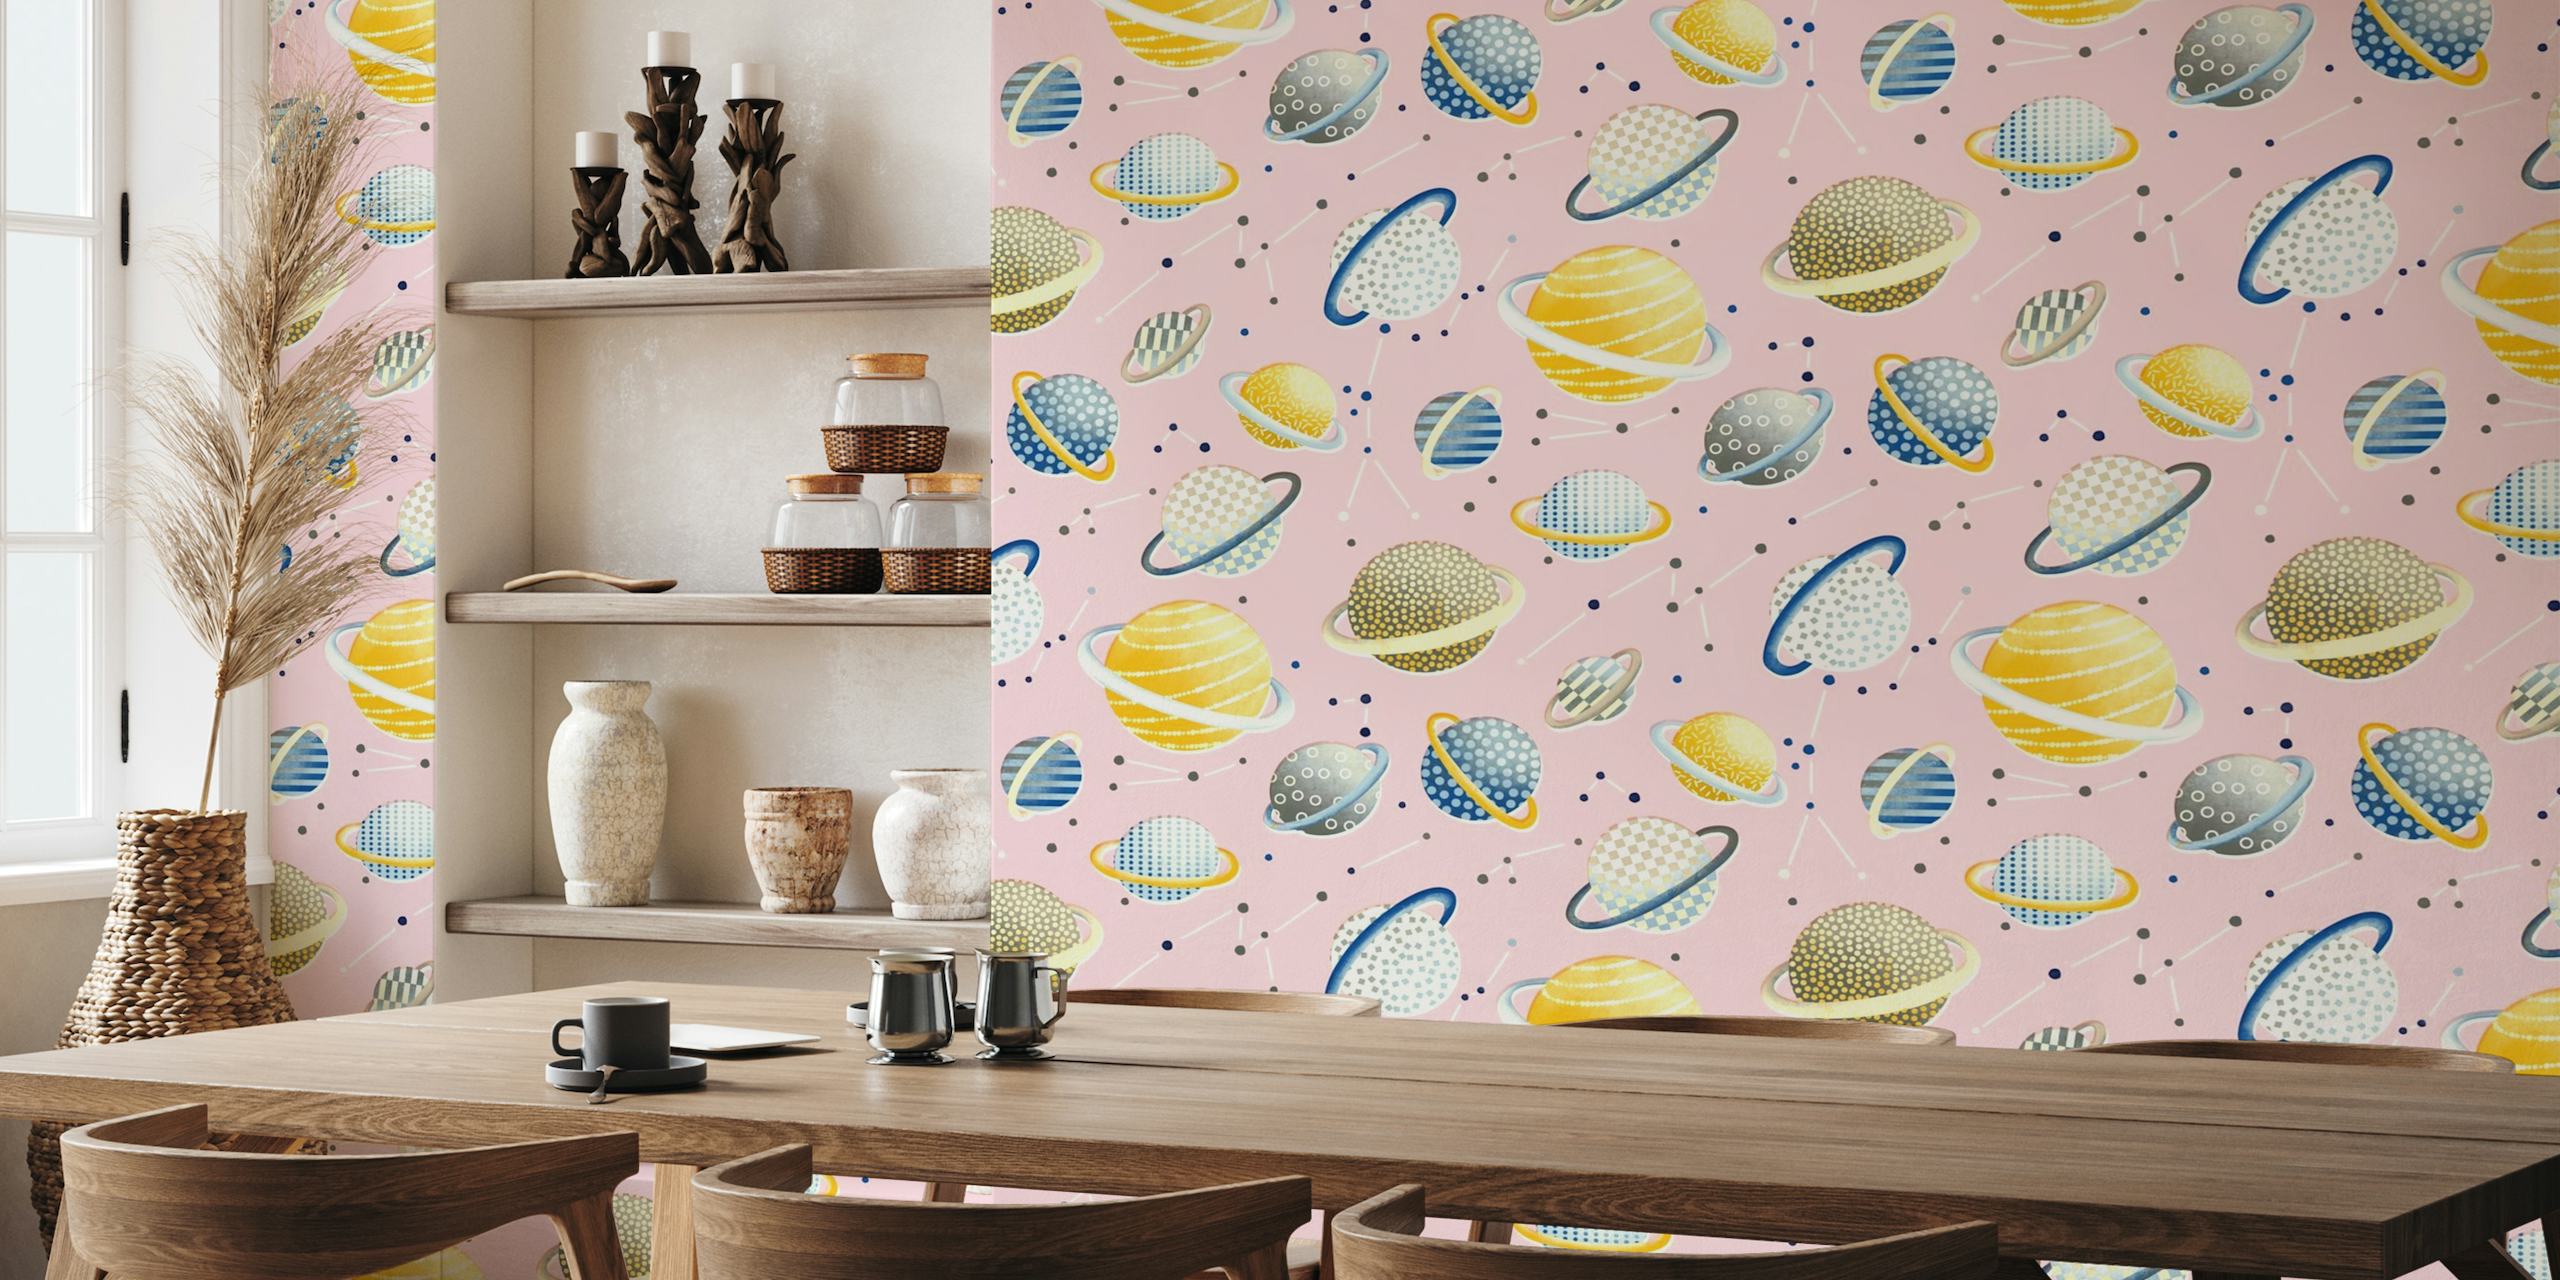 Celestial view of planets and constellations papiers peint